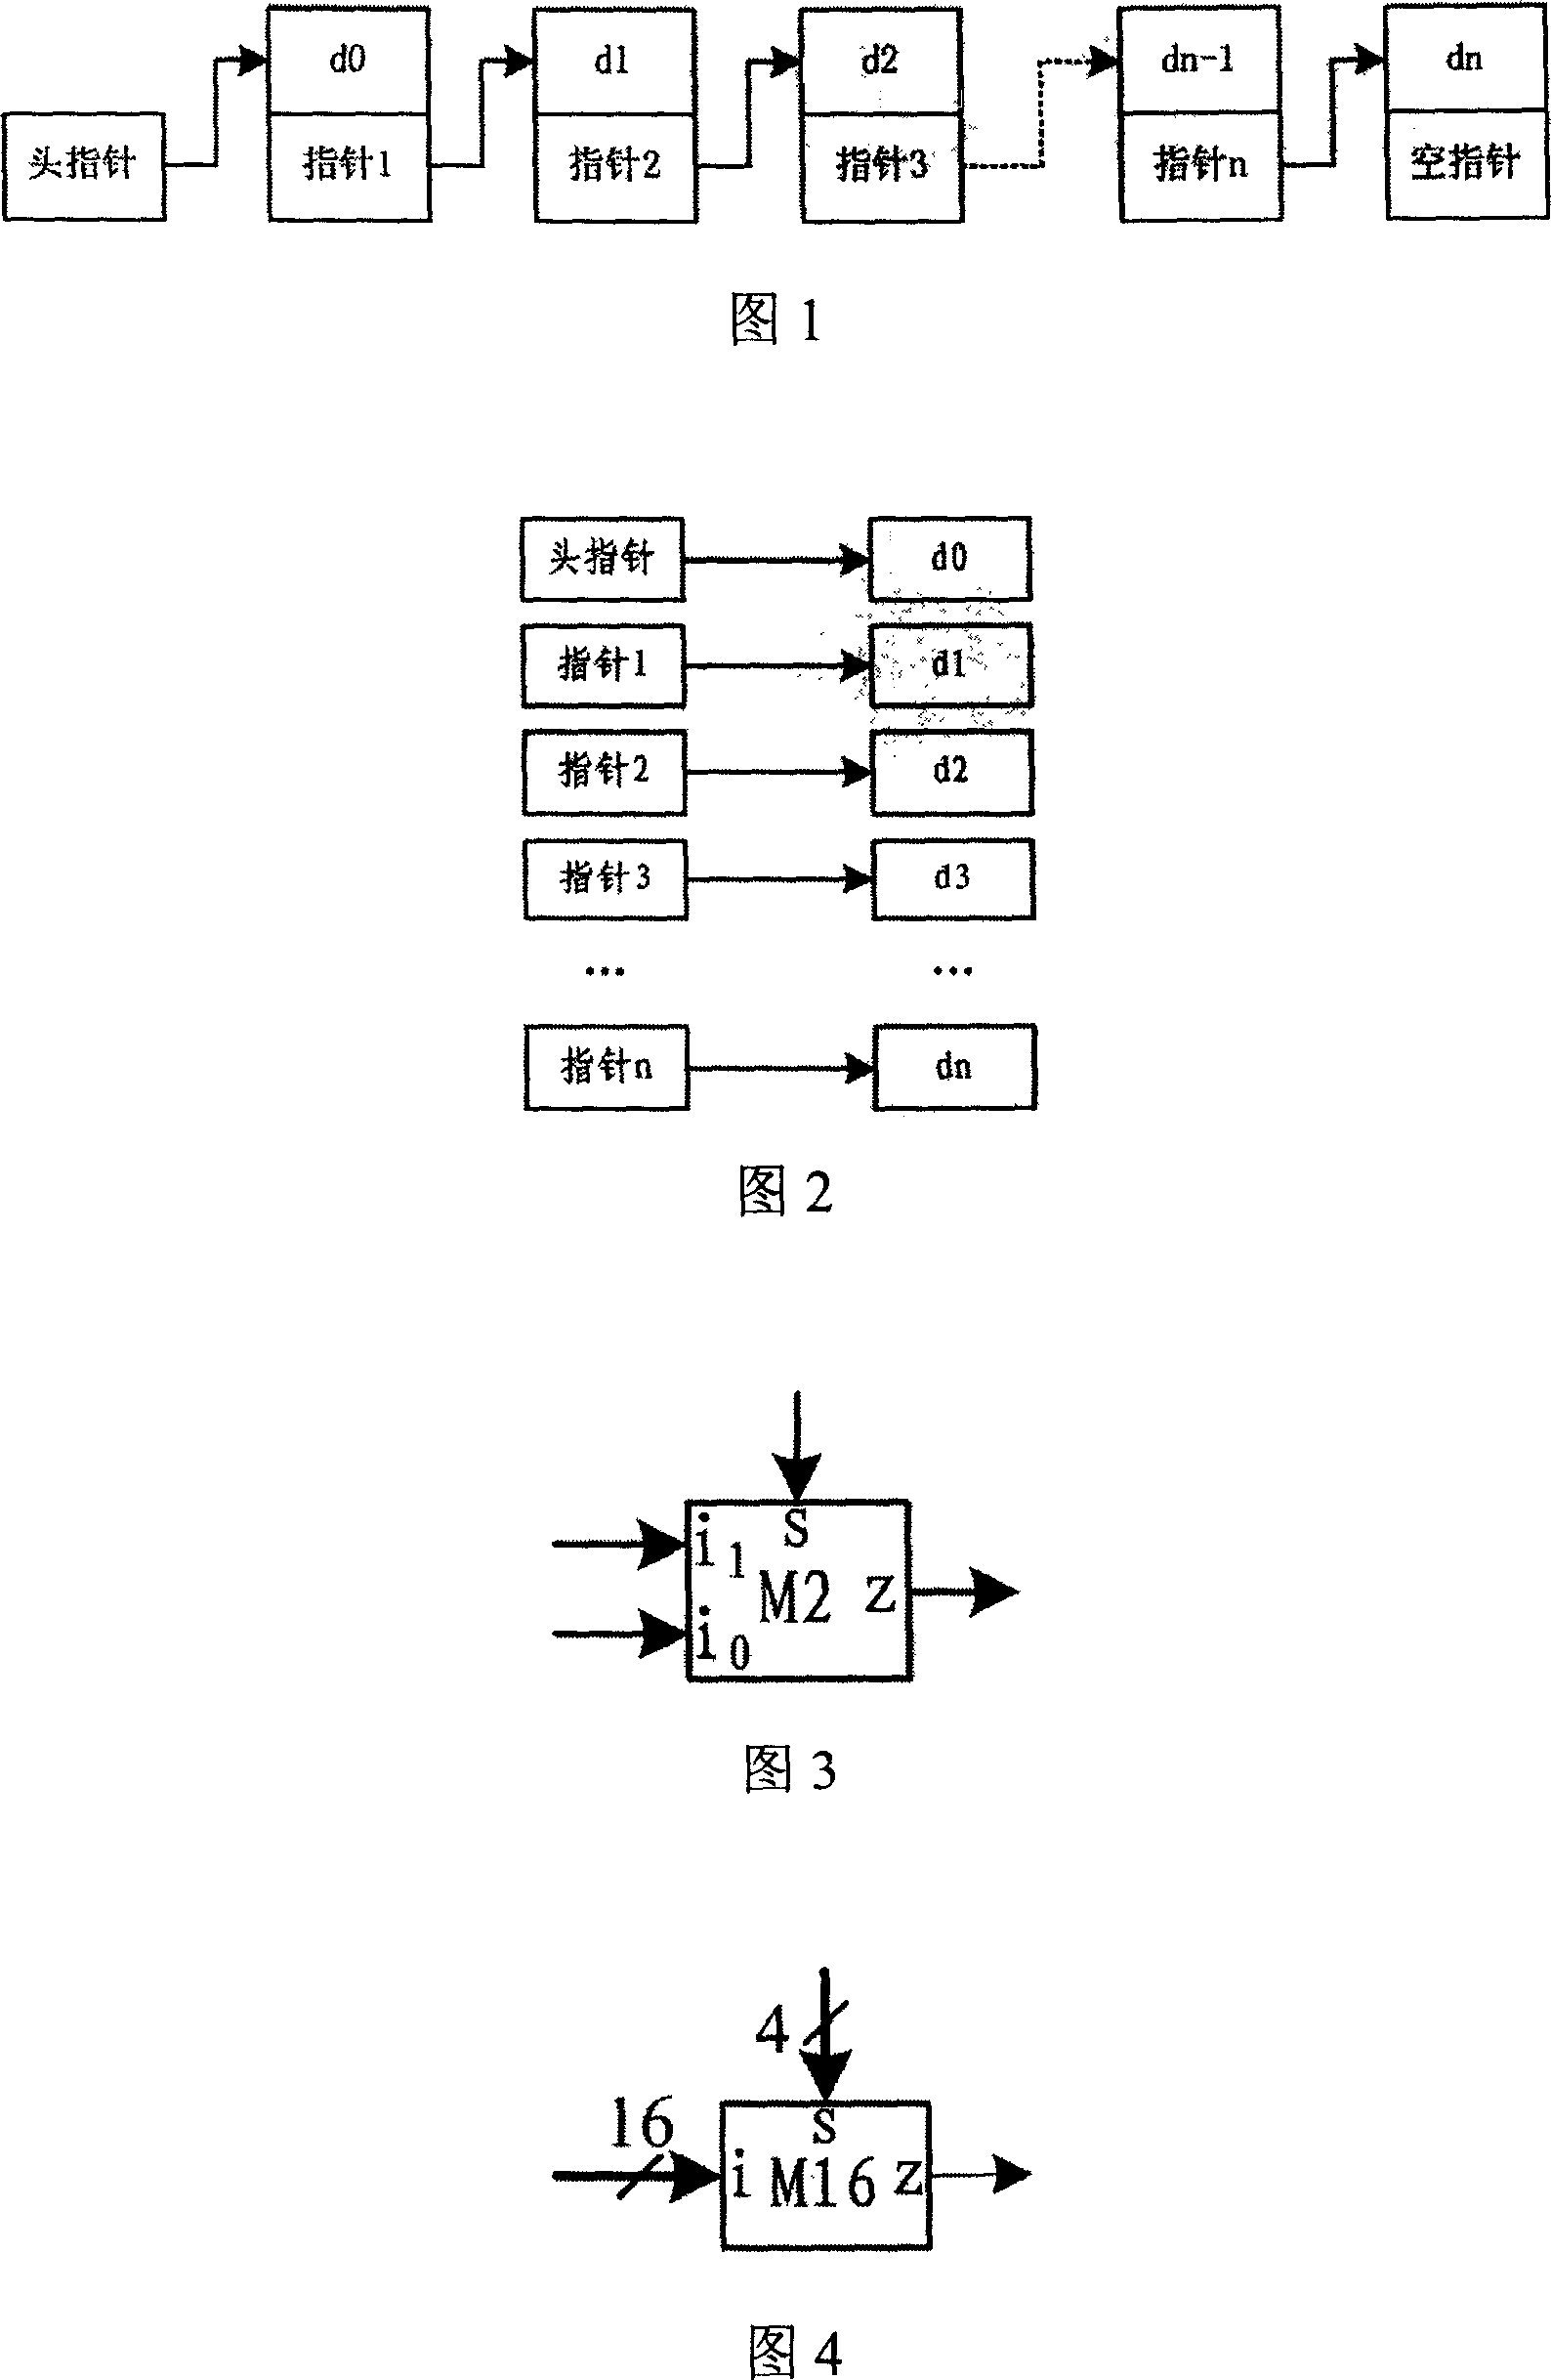 Hardware circuit for realizing data sequencing and method